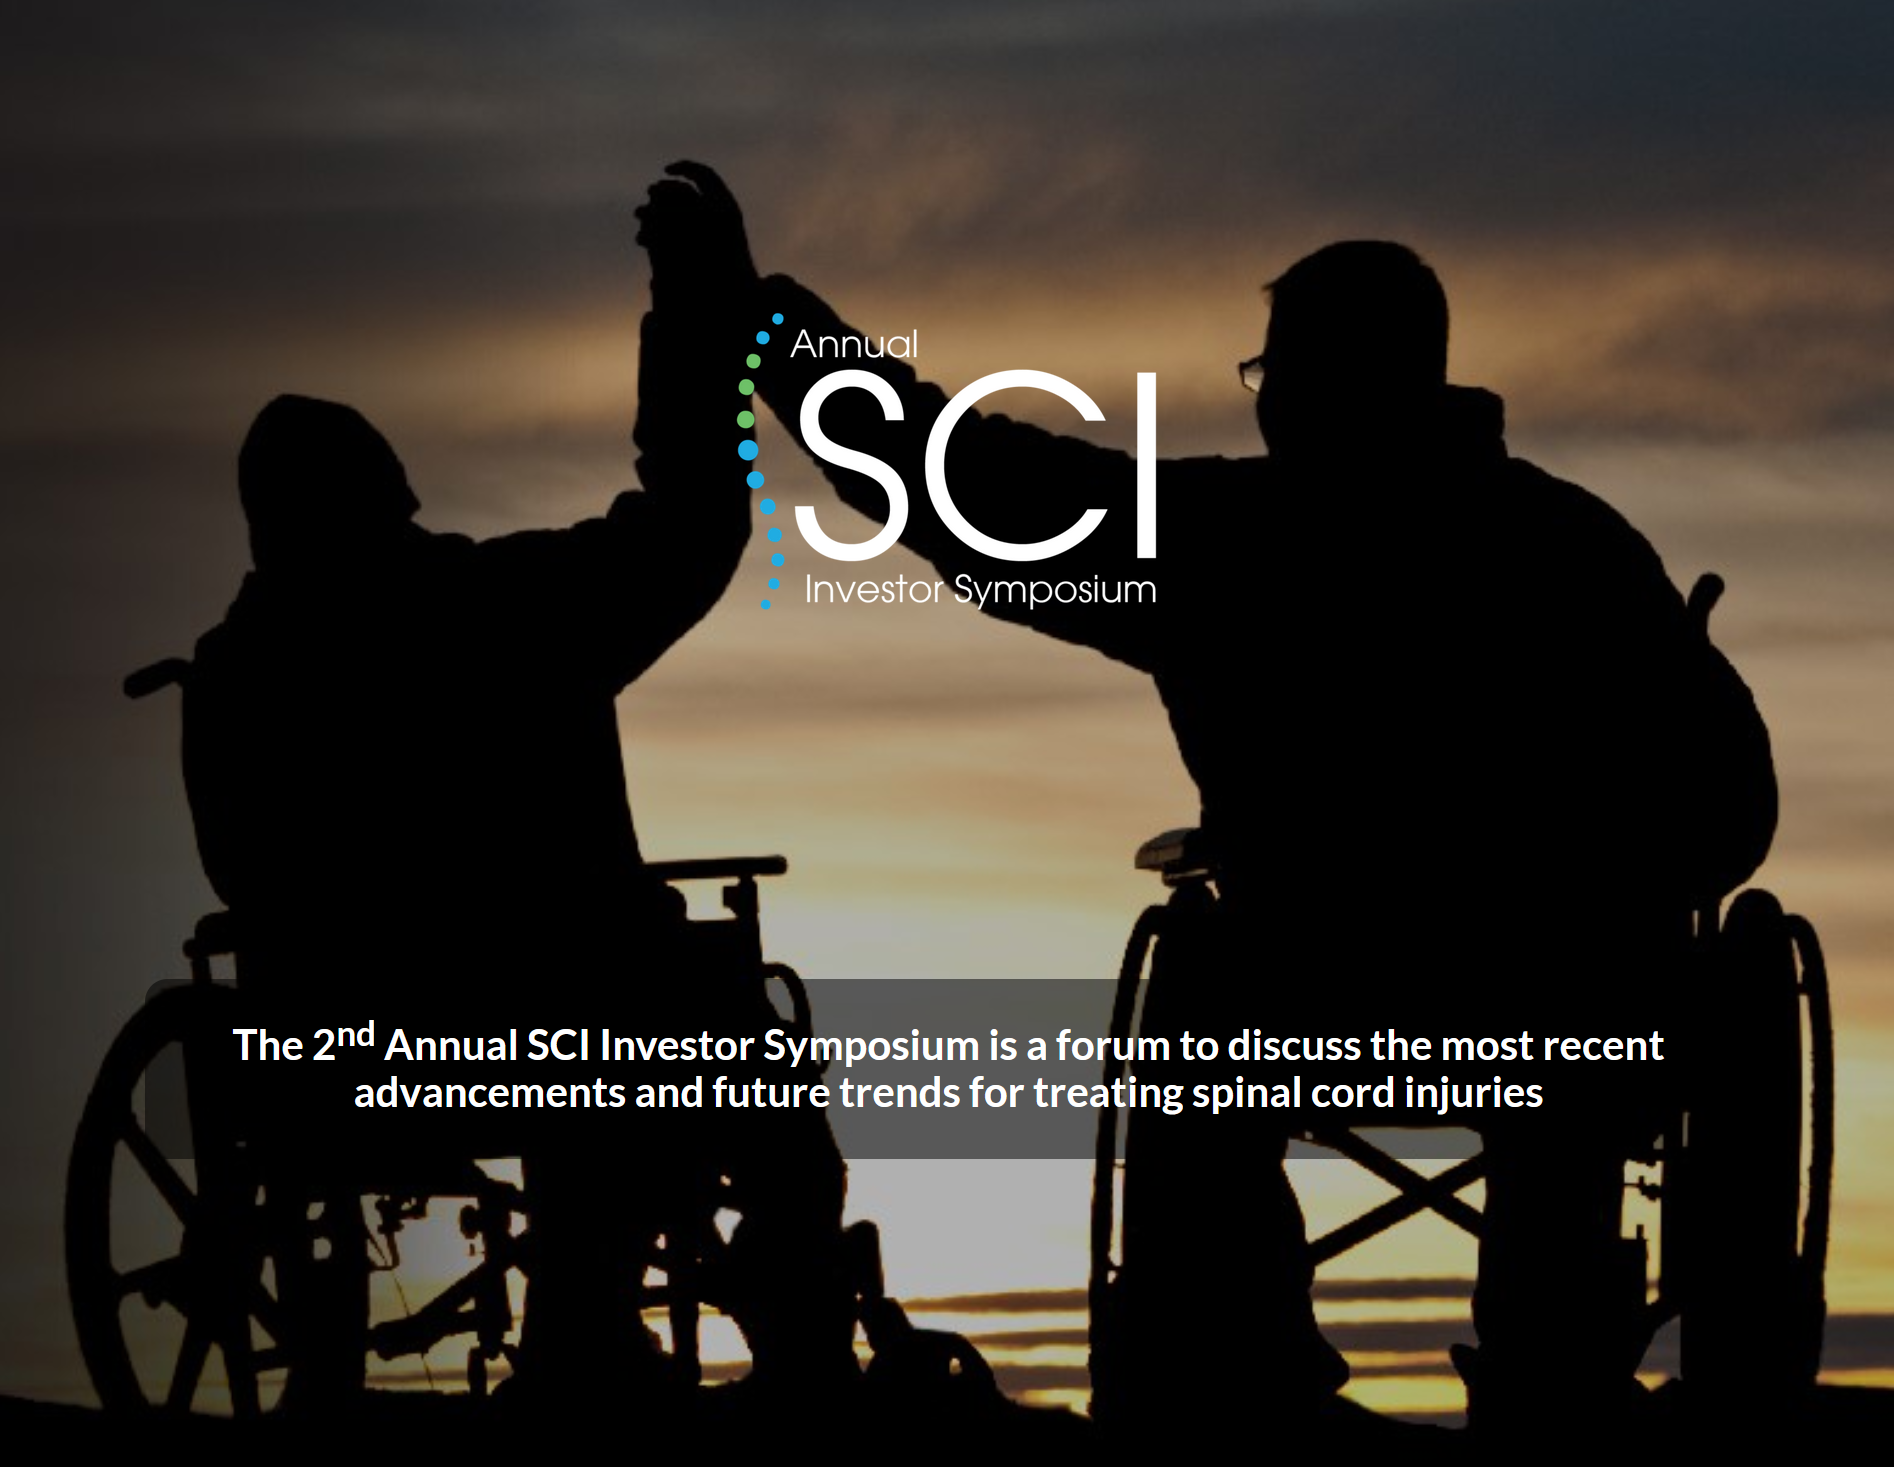 The 2nd Annual SCI Investor Symposium is a forum to discuss the most recent advancements and future trends for treating spinal cord injuries.